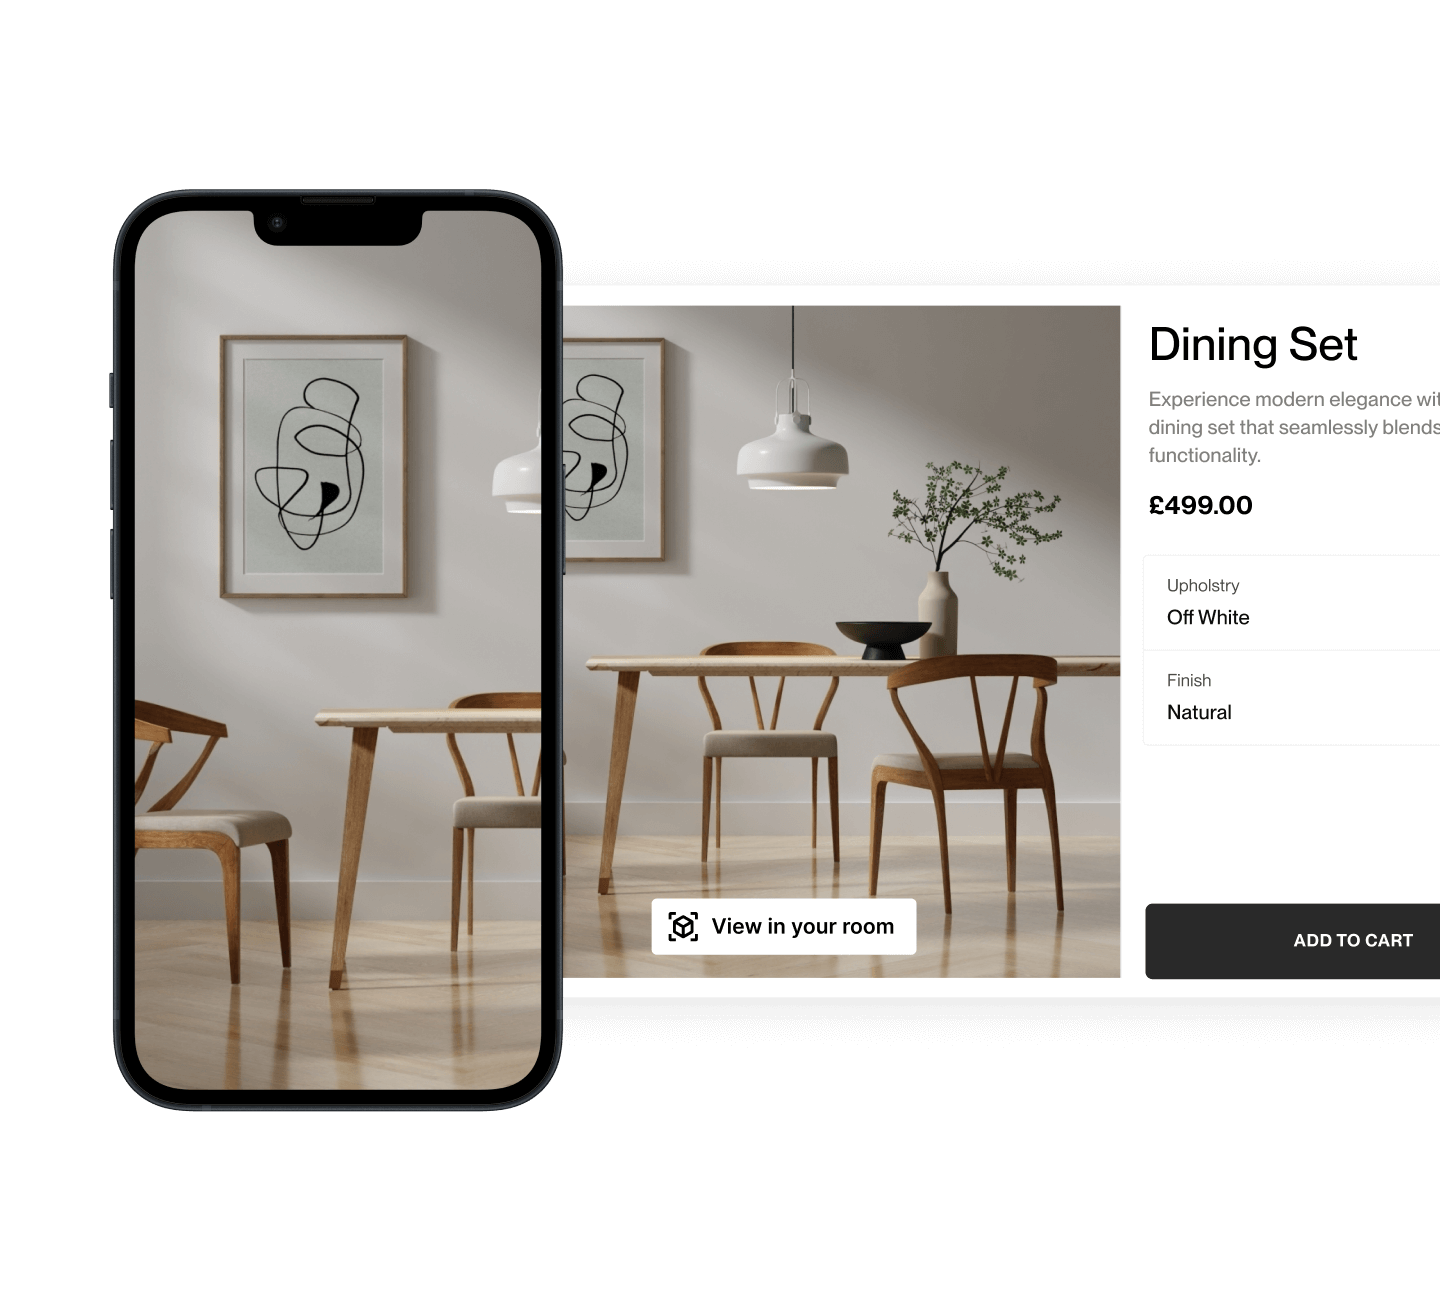 Lifestyle shot of dining set placed inside a room with AR